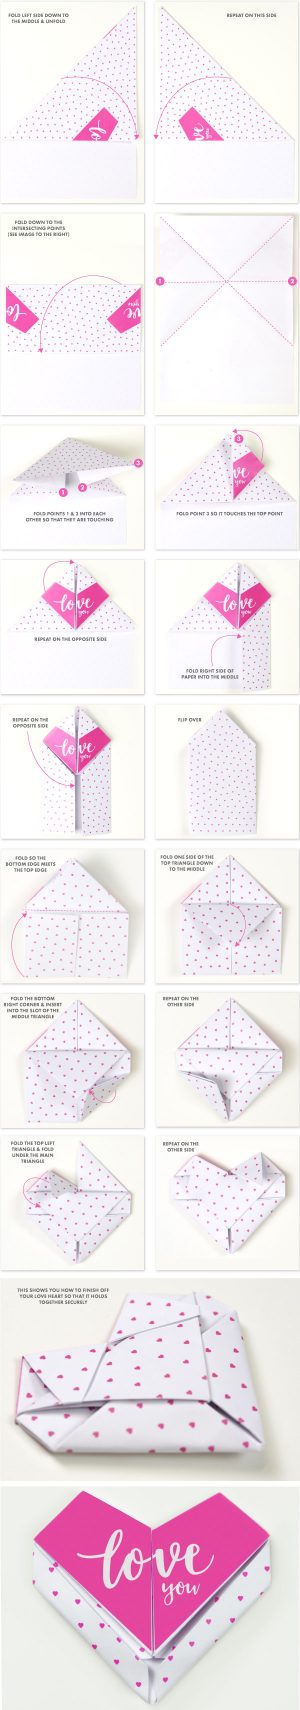 Origami Instruction Com Free Love Heart Origami Tutorial For Valentines Day Bright Star Kids